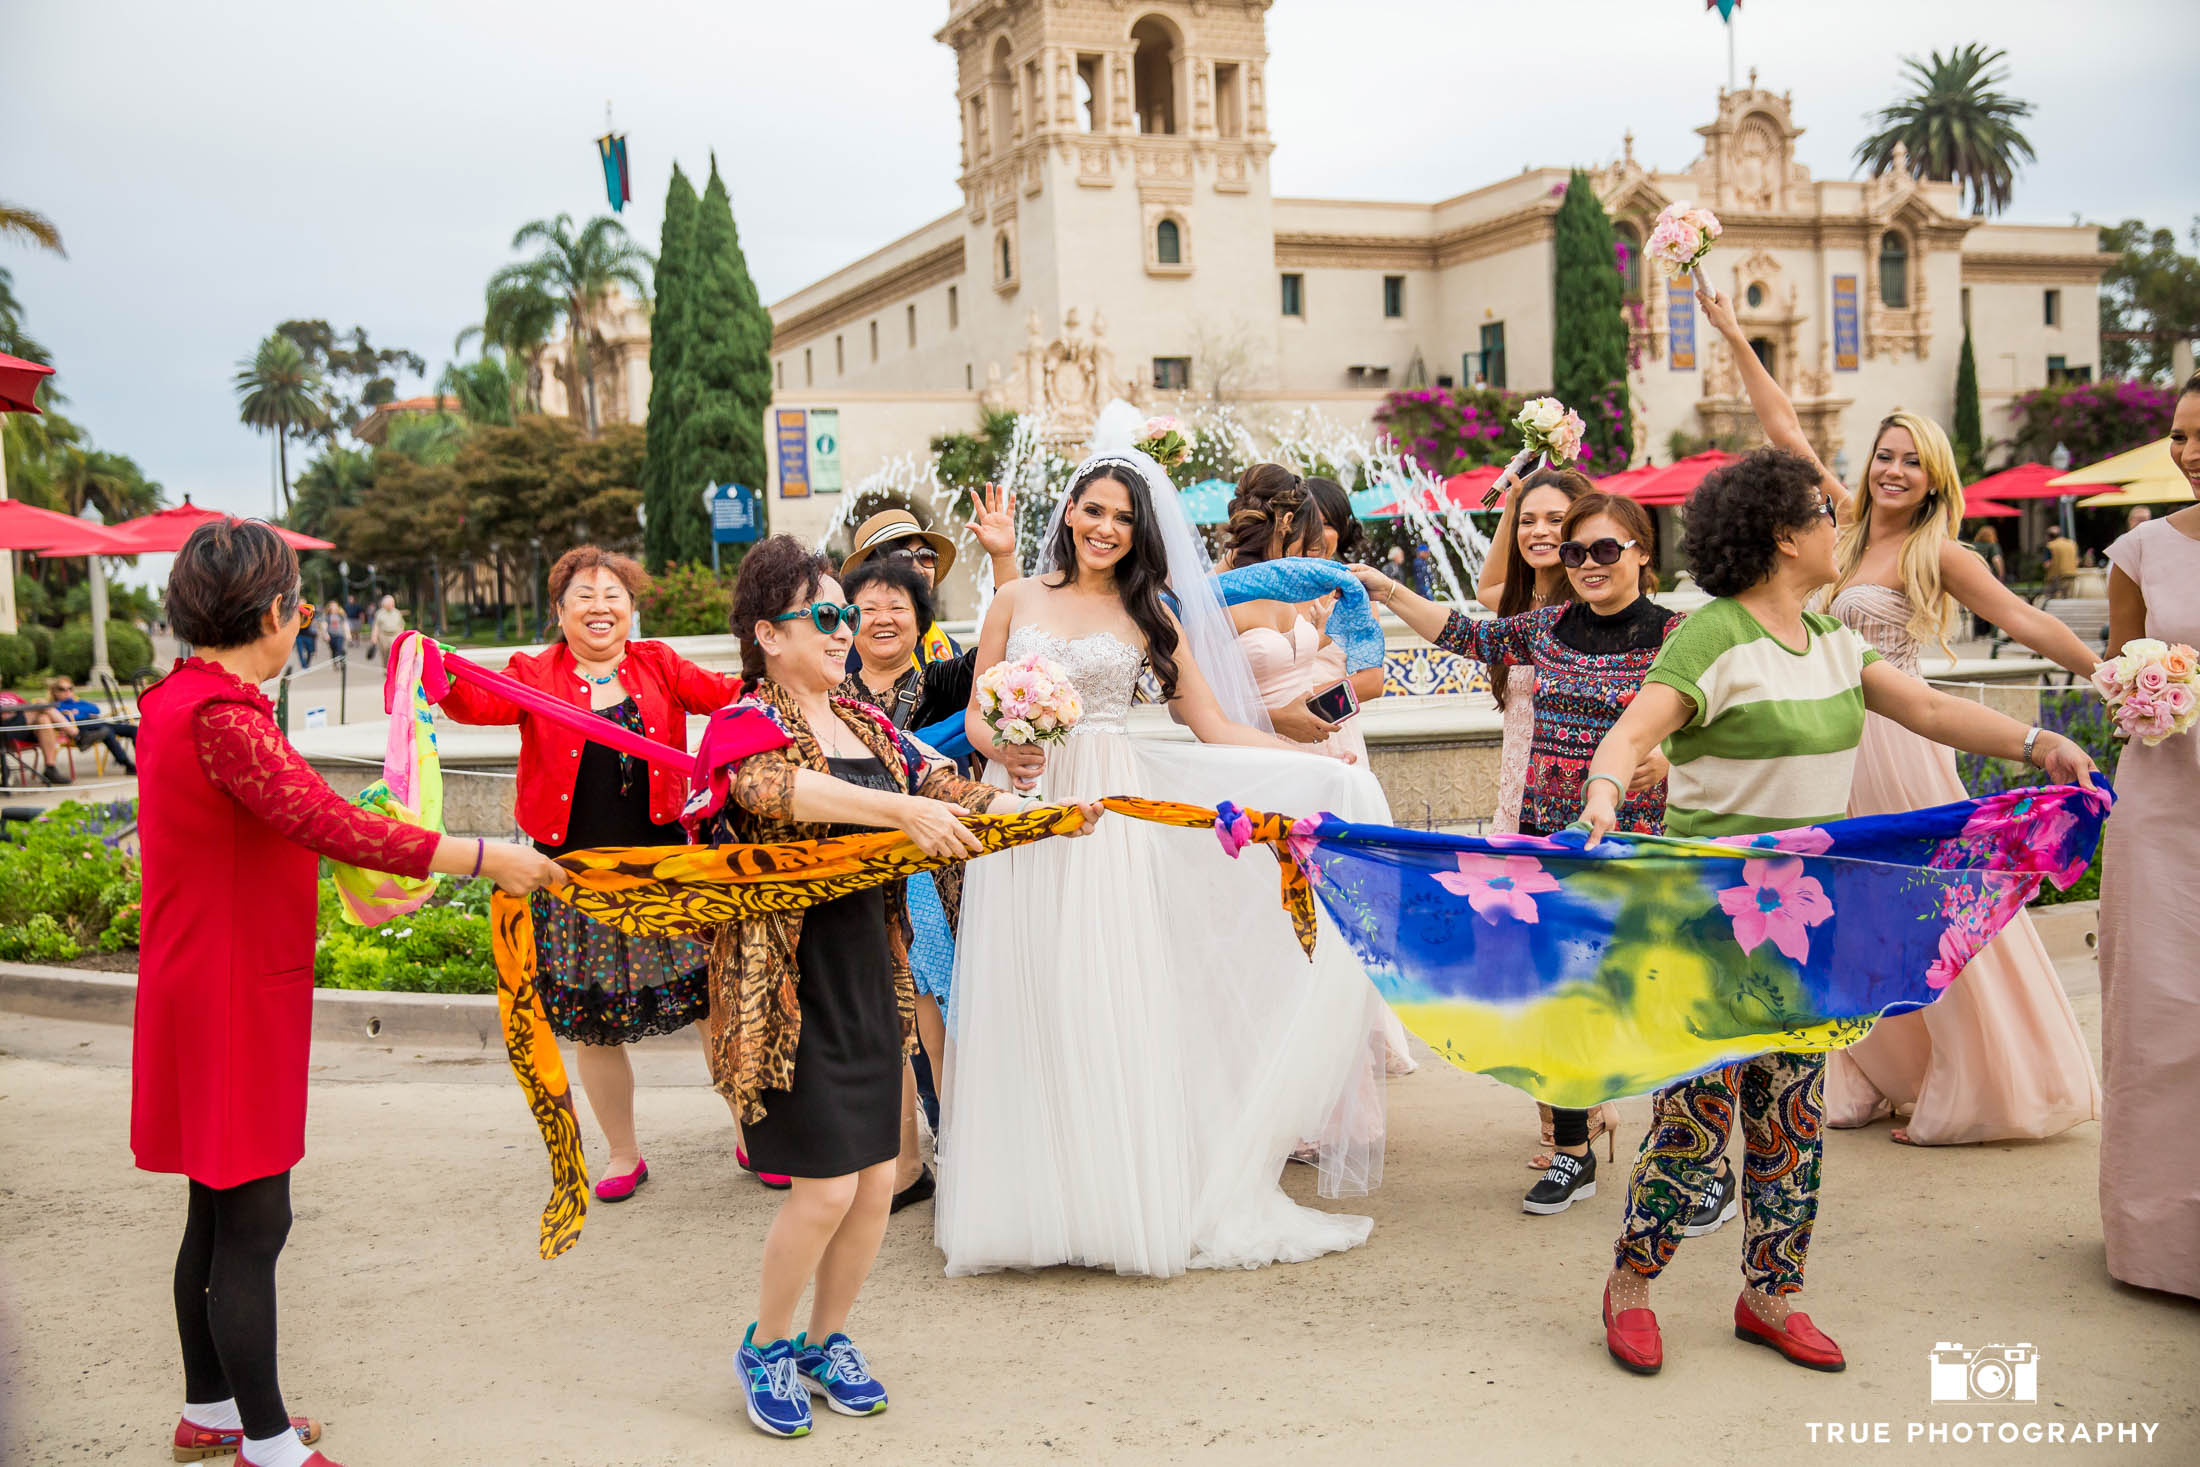 Street performers dance with scarves around Bride after wedding ceremony